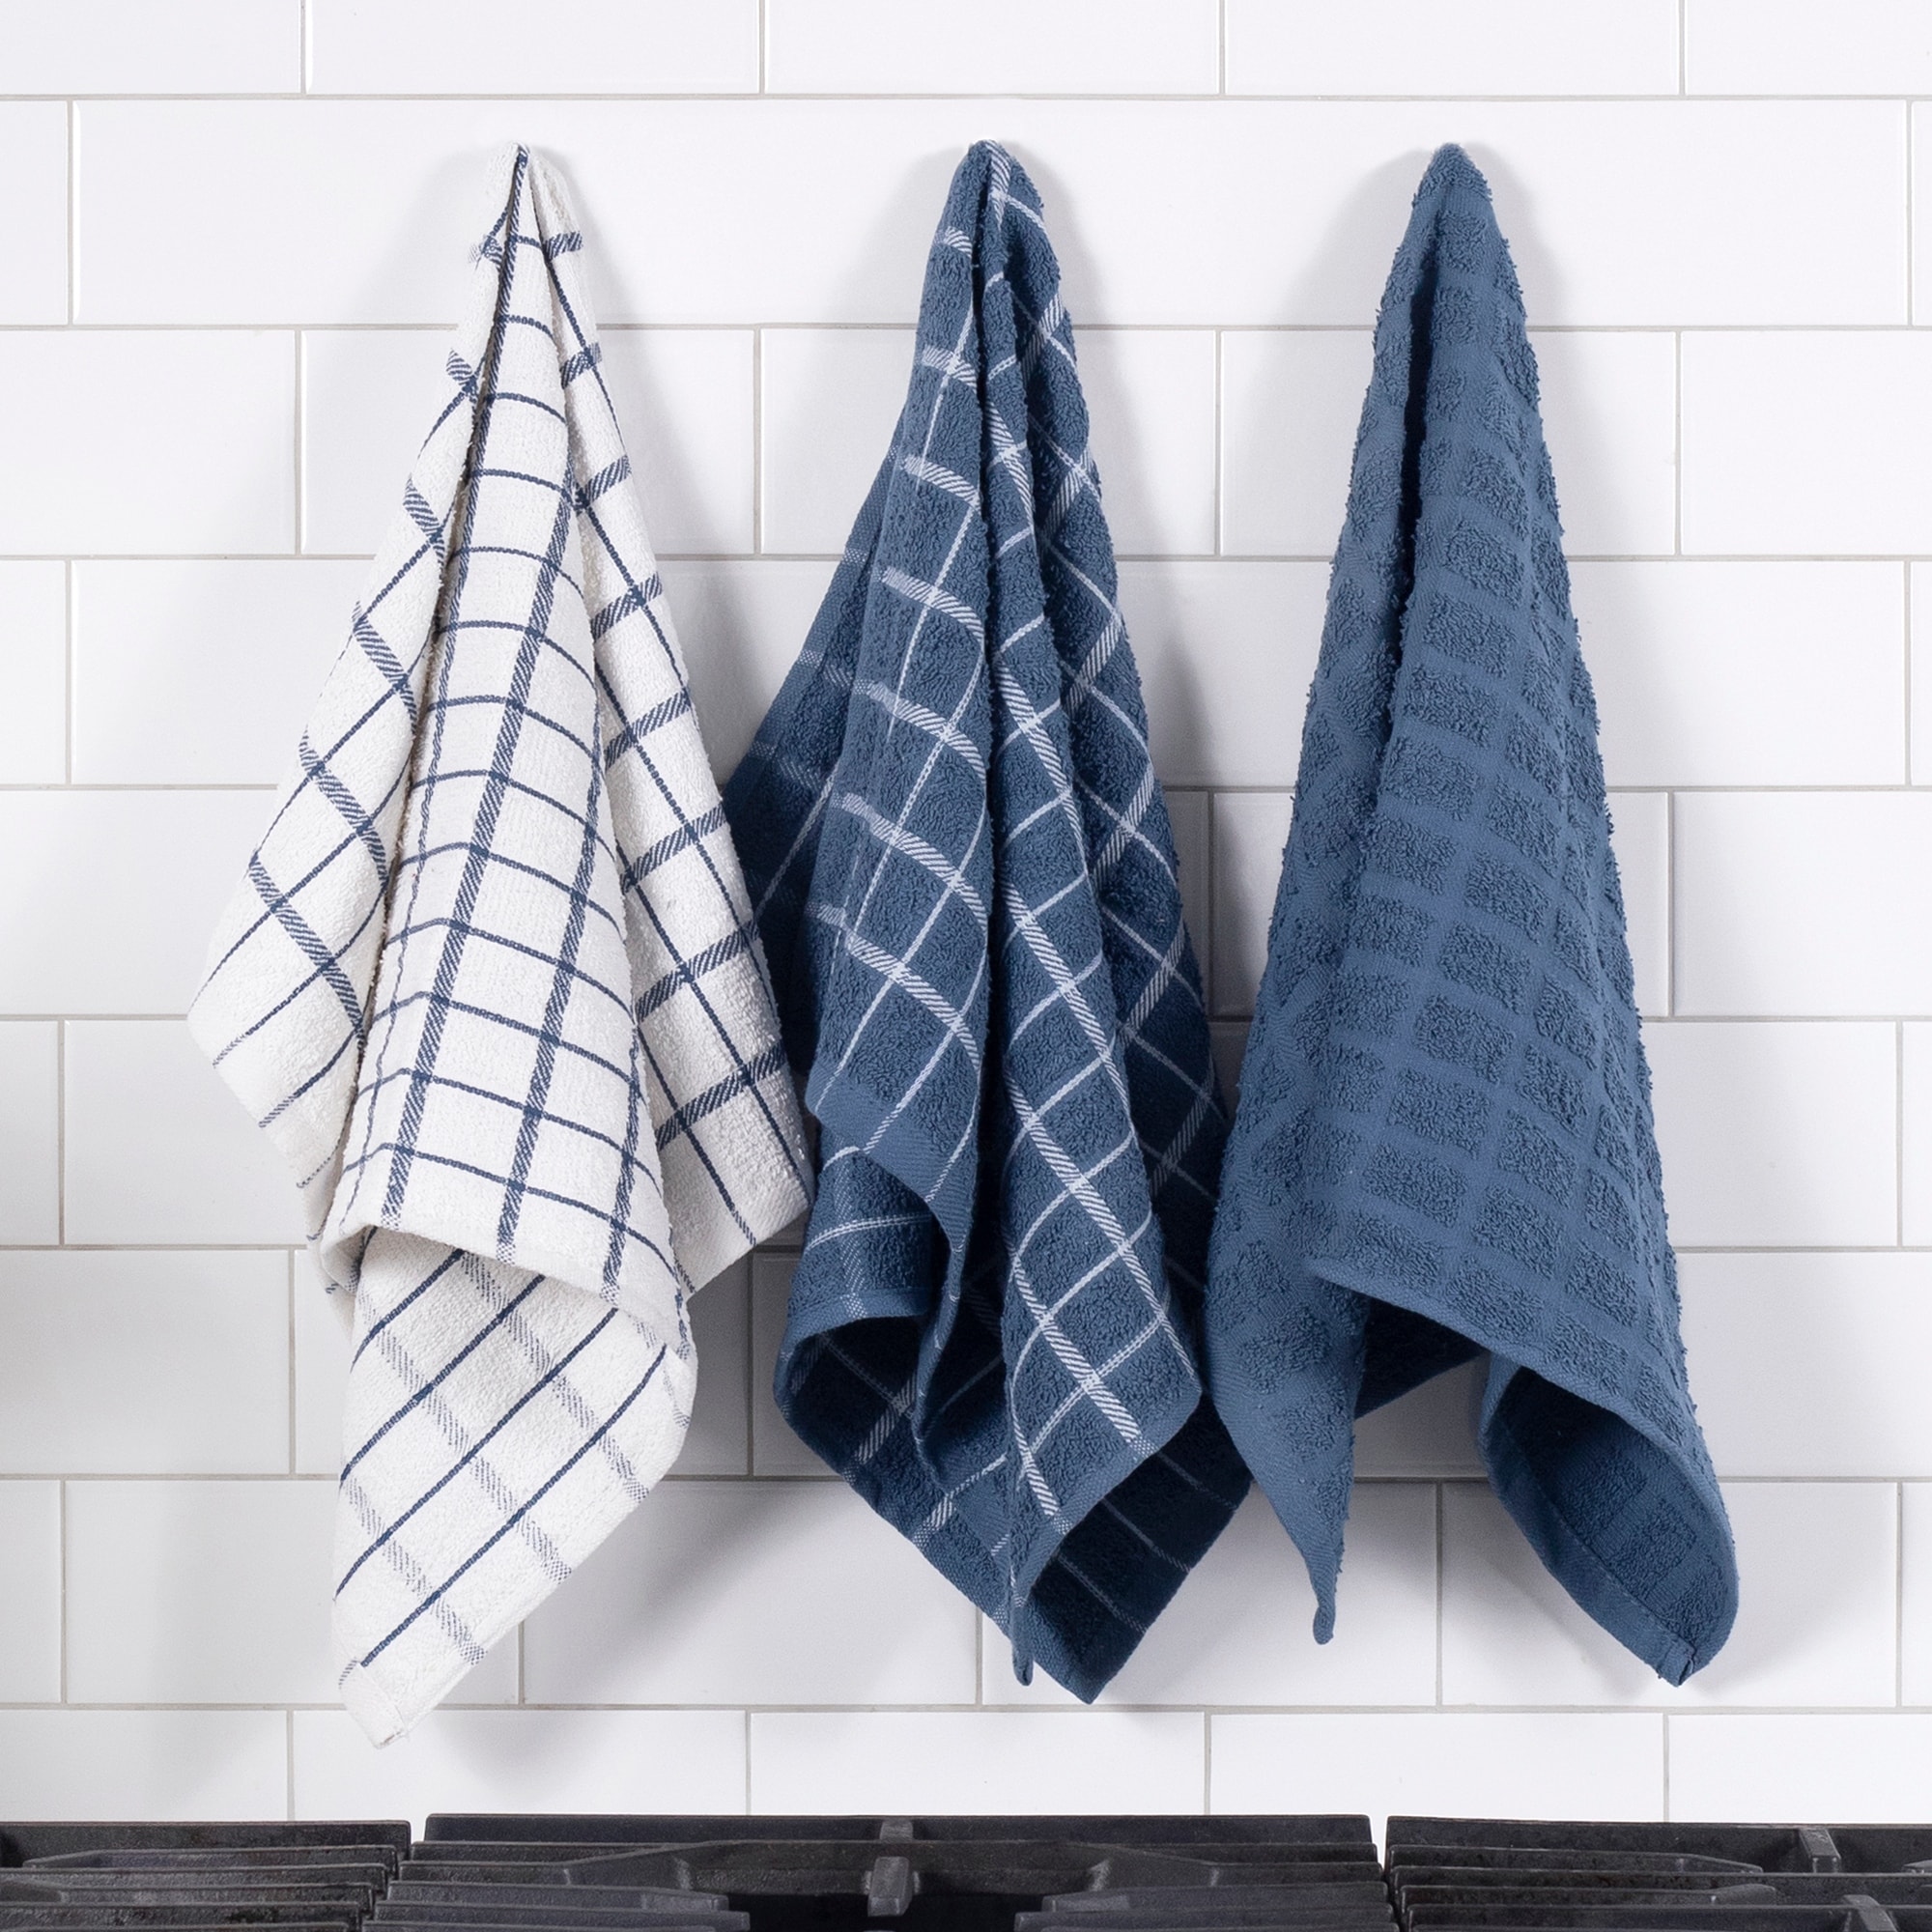 https://ak1.ostkcdn.com/images/products/is/images/direct/b4e0a34412a2d79f7c7bb60189a9320ff358f77f/RITZ-Terry-Check-Kitchen-Towel%2C-Set-of-3.jpg